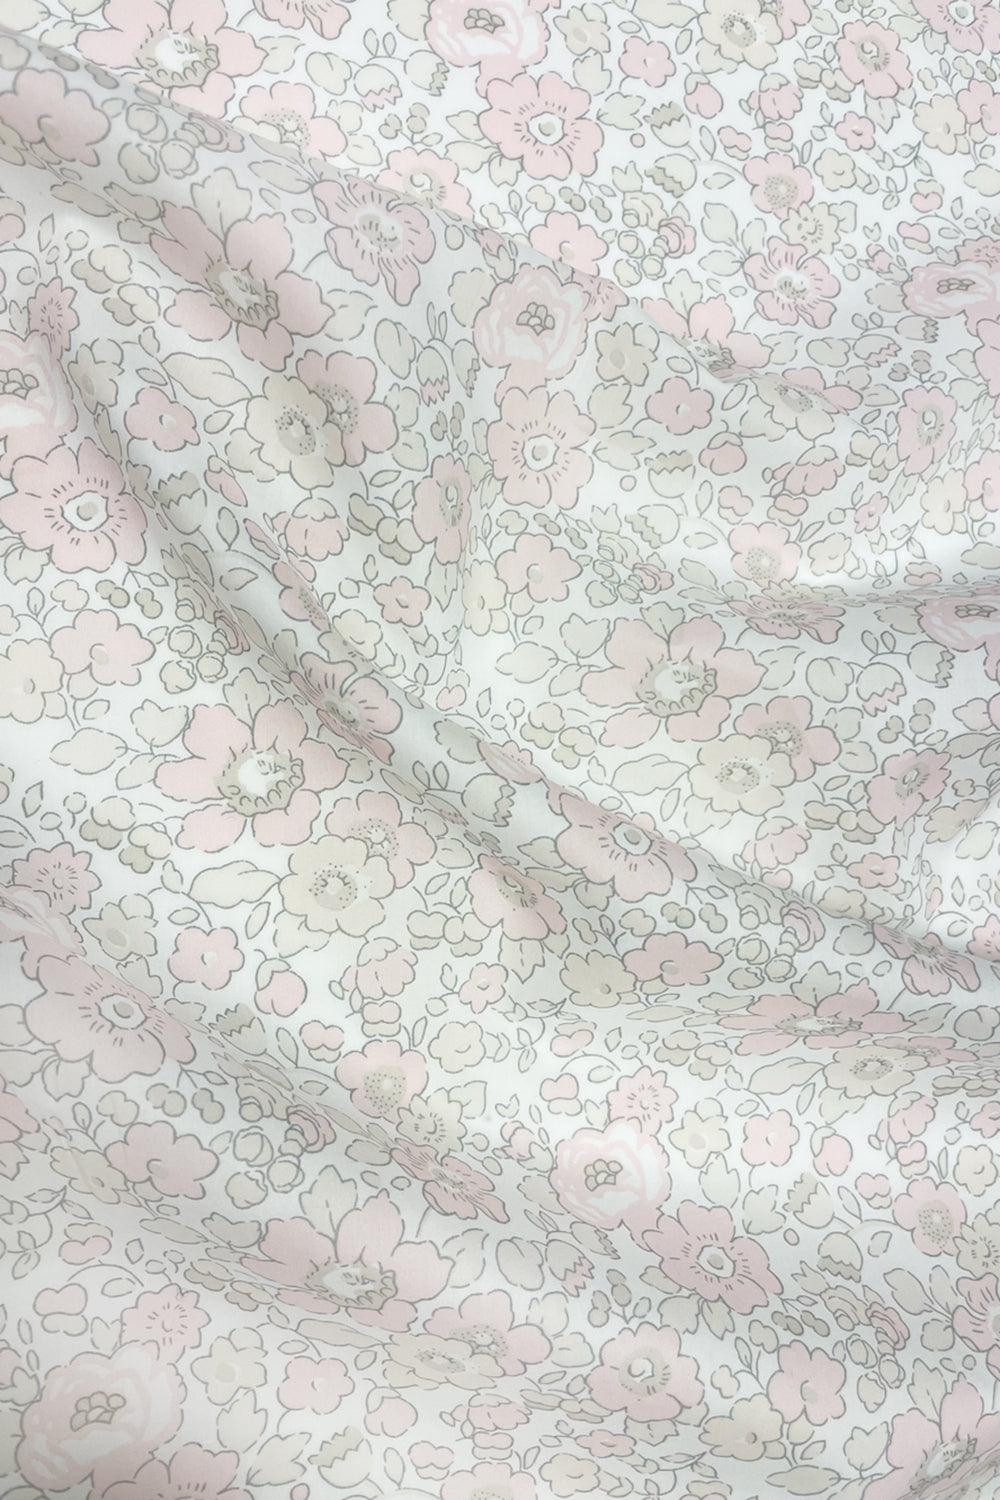 Bedding made with Liberty Fabric BETSY LACE - Coco & Wolf